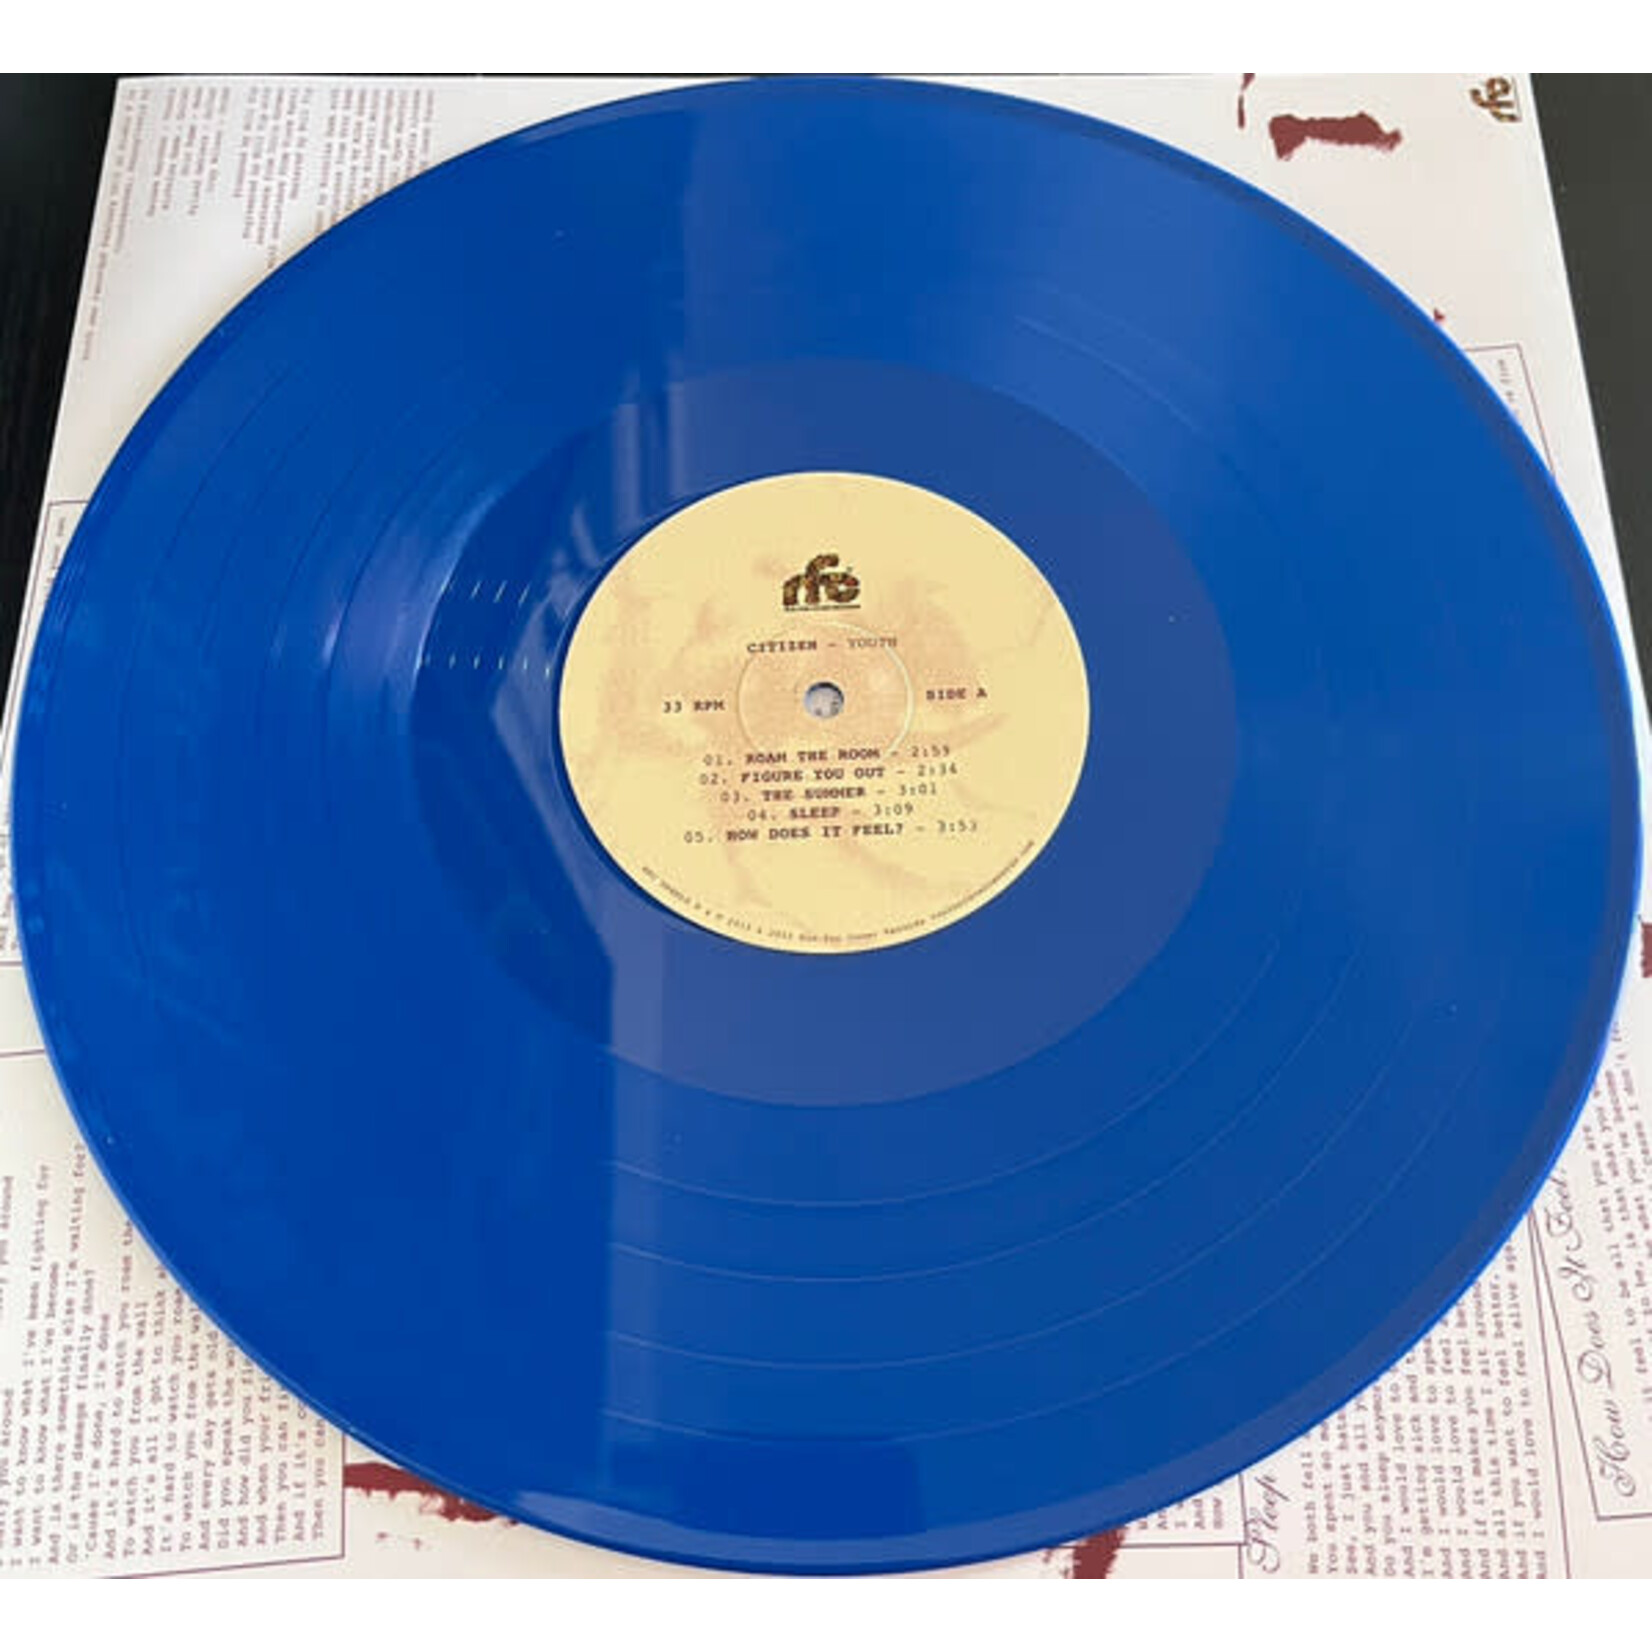 [New] Citizen - Youth (10 year anniversary edition, blue vinyl)